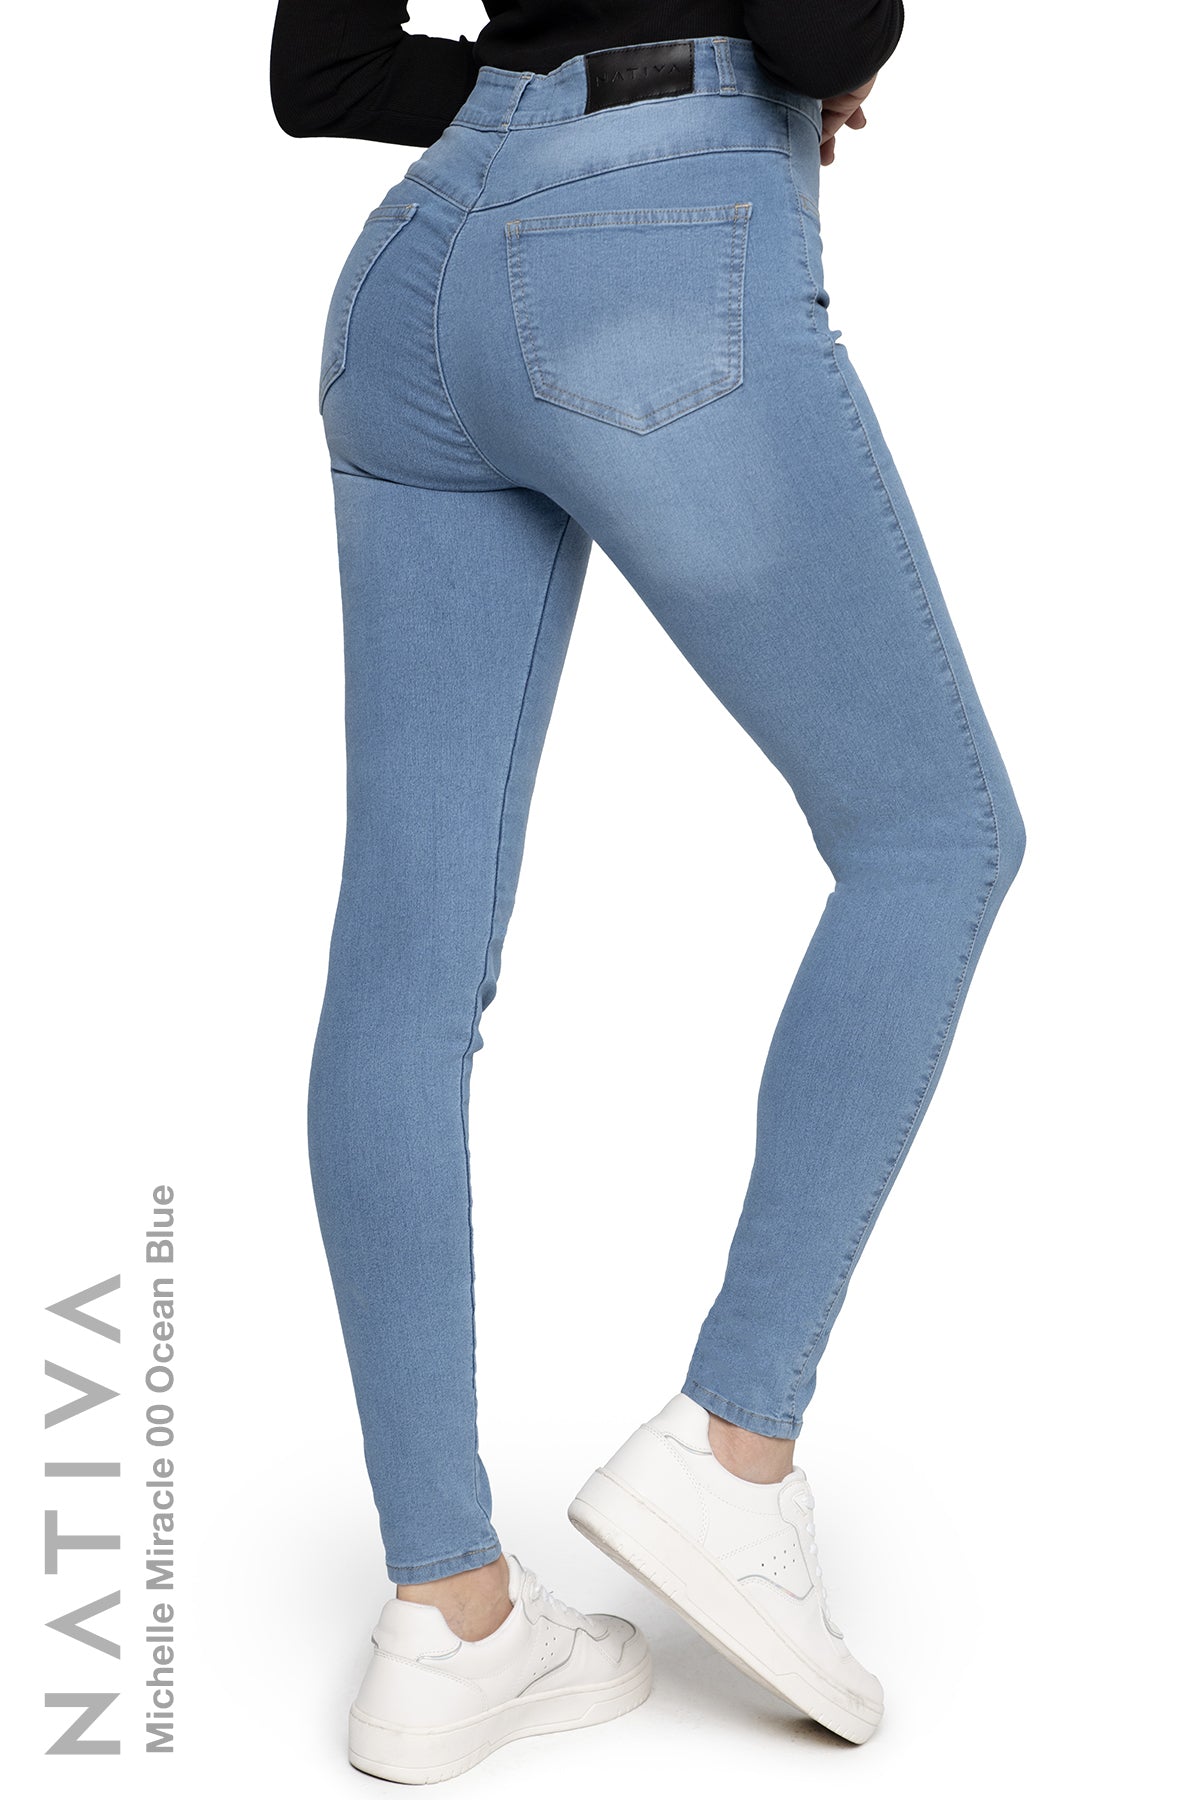 MICHELLE Ca JEANS. High Shaping NATIVA, BLUE, STRETCH 00 MIRACLE OCEAN